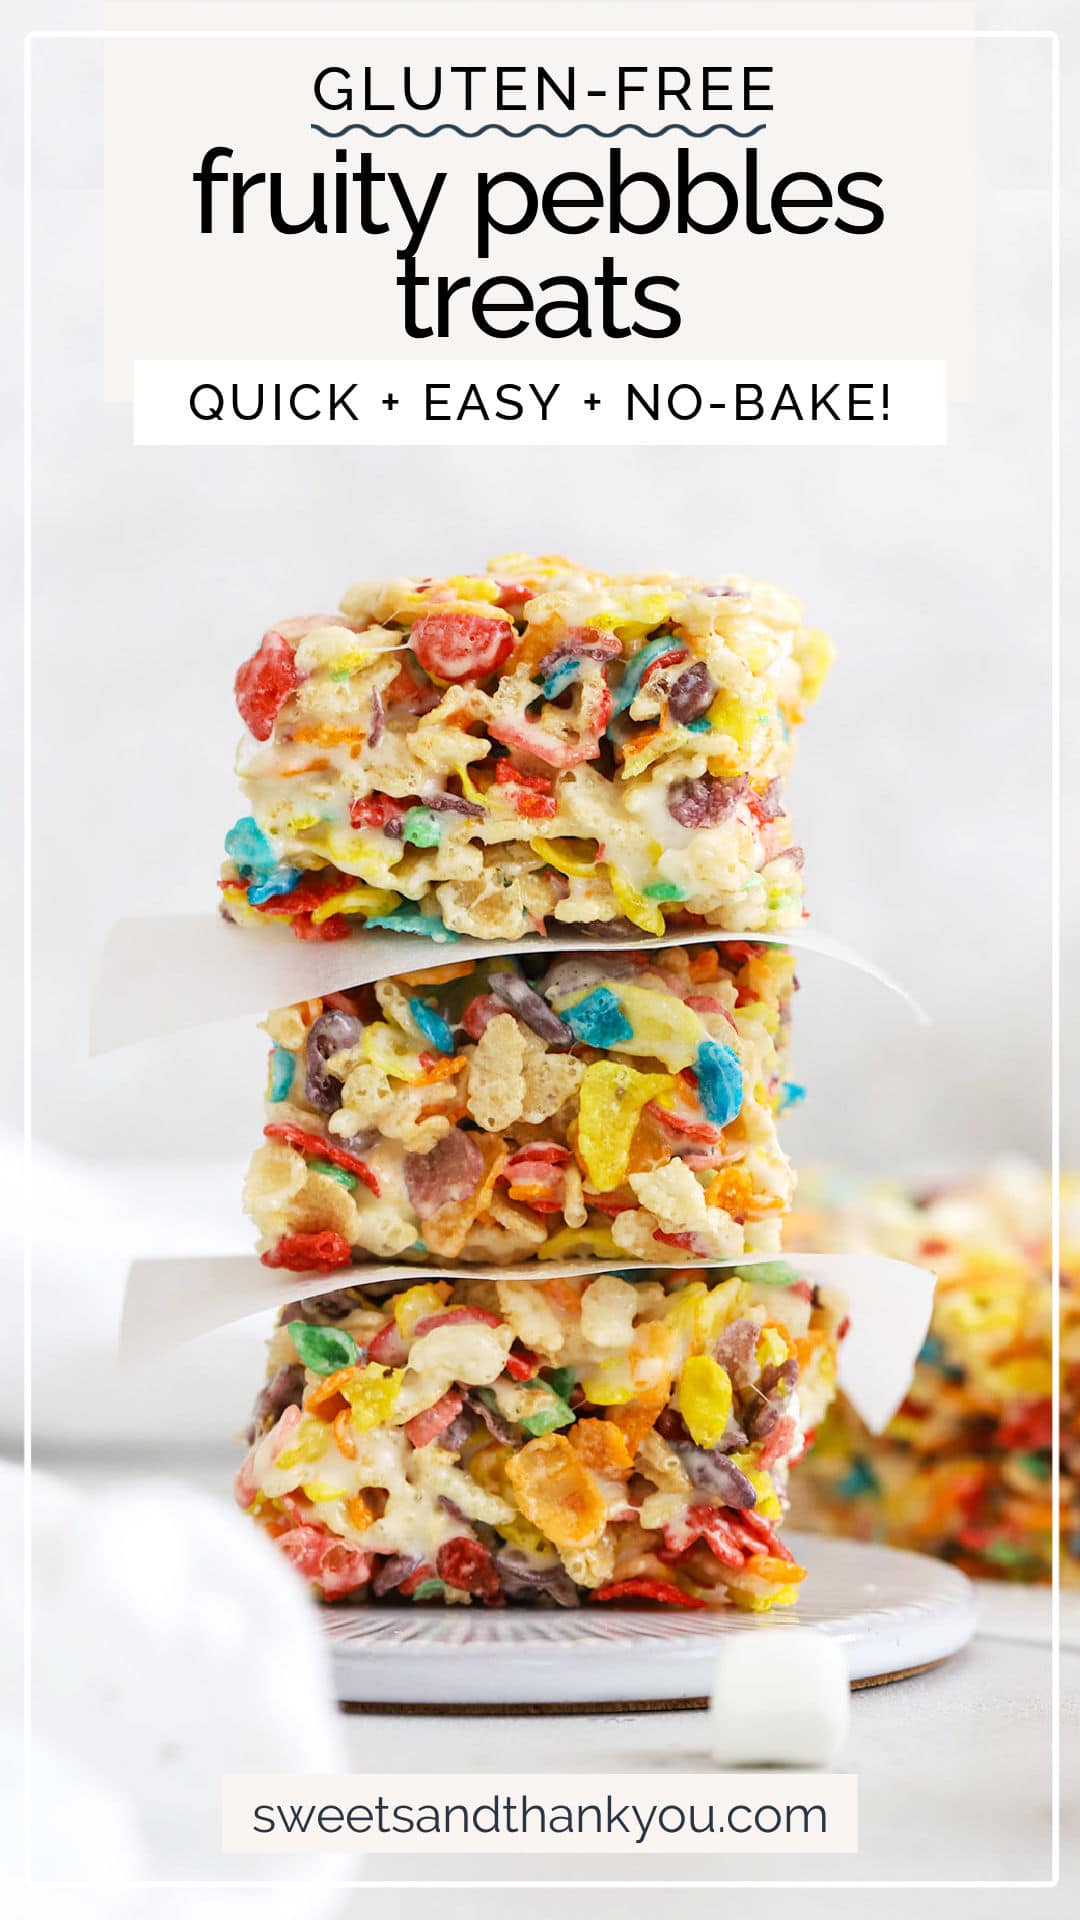 Gluten-Free Fruity Pebbles Treats - These easy fruity pebbles crispy treats are a simple no-bake treat you'll love. // gluten-free no bake dessert // gluten-free cereal bars // gluten free fruity pebbles rice krispies treats // gluten-free fruity pebbles rice crispy treats // fruity pebbles crispy treats // gluten-free fruity pebbles cereal treats // gluten-free dessert // kid friendly dessert // rainbow desserts // st. patricks day dessert // colorful dessert recipes //